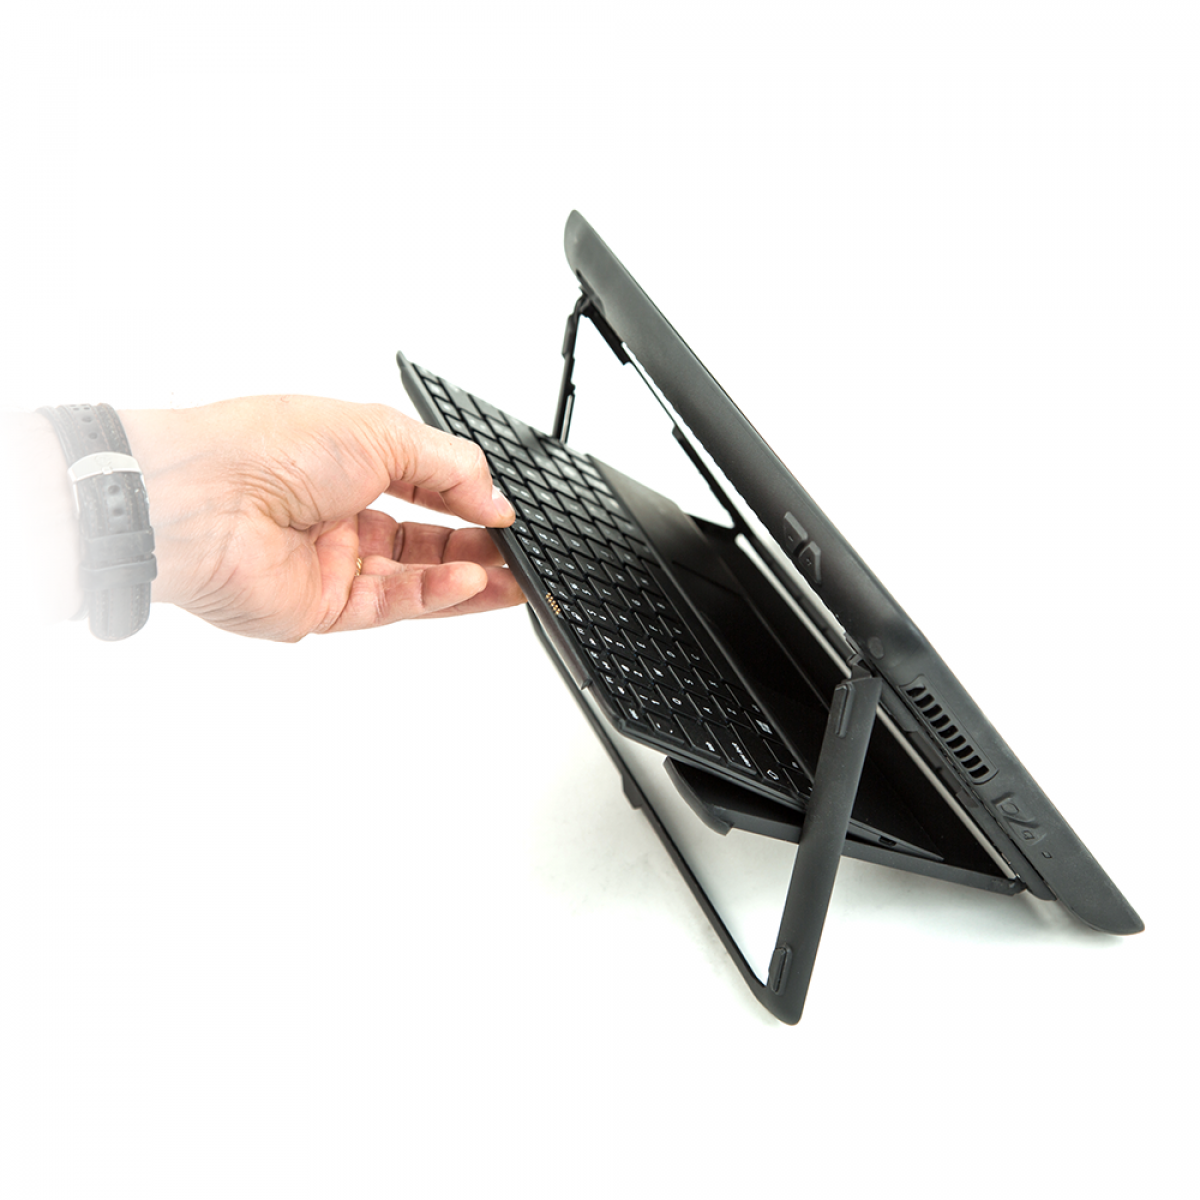 Zebra Xslate R12 with stand and keyboard accessories